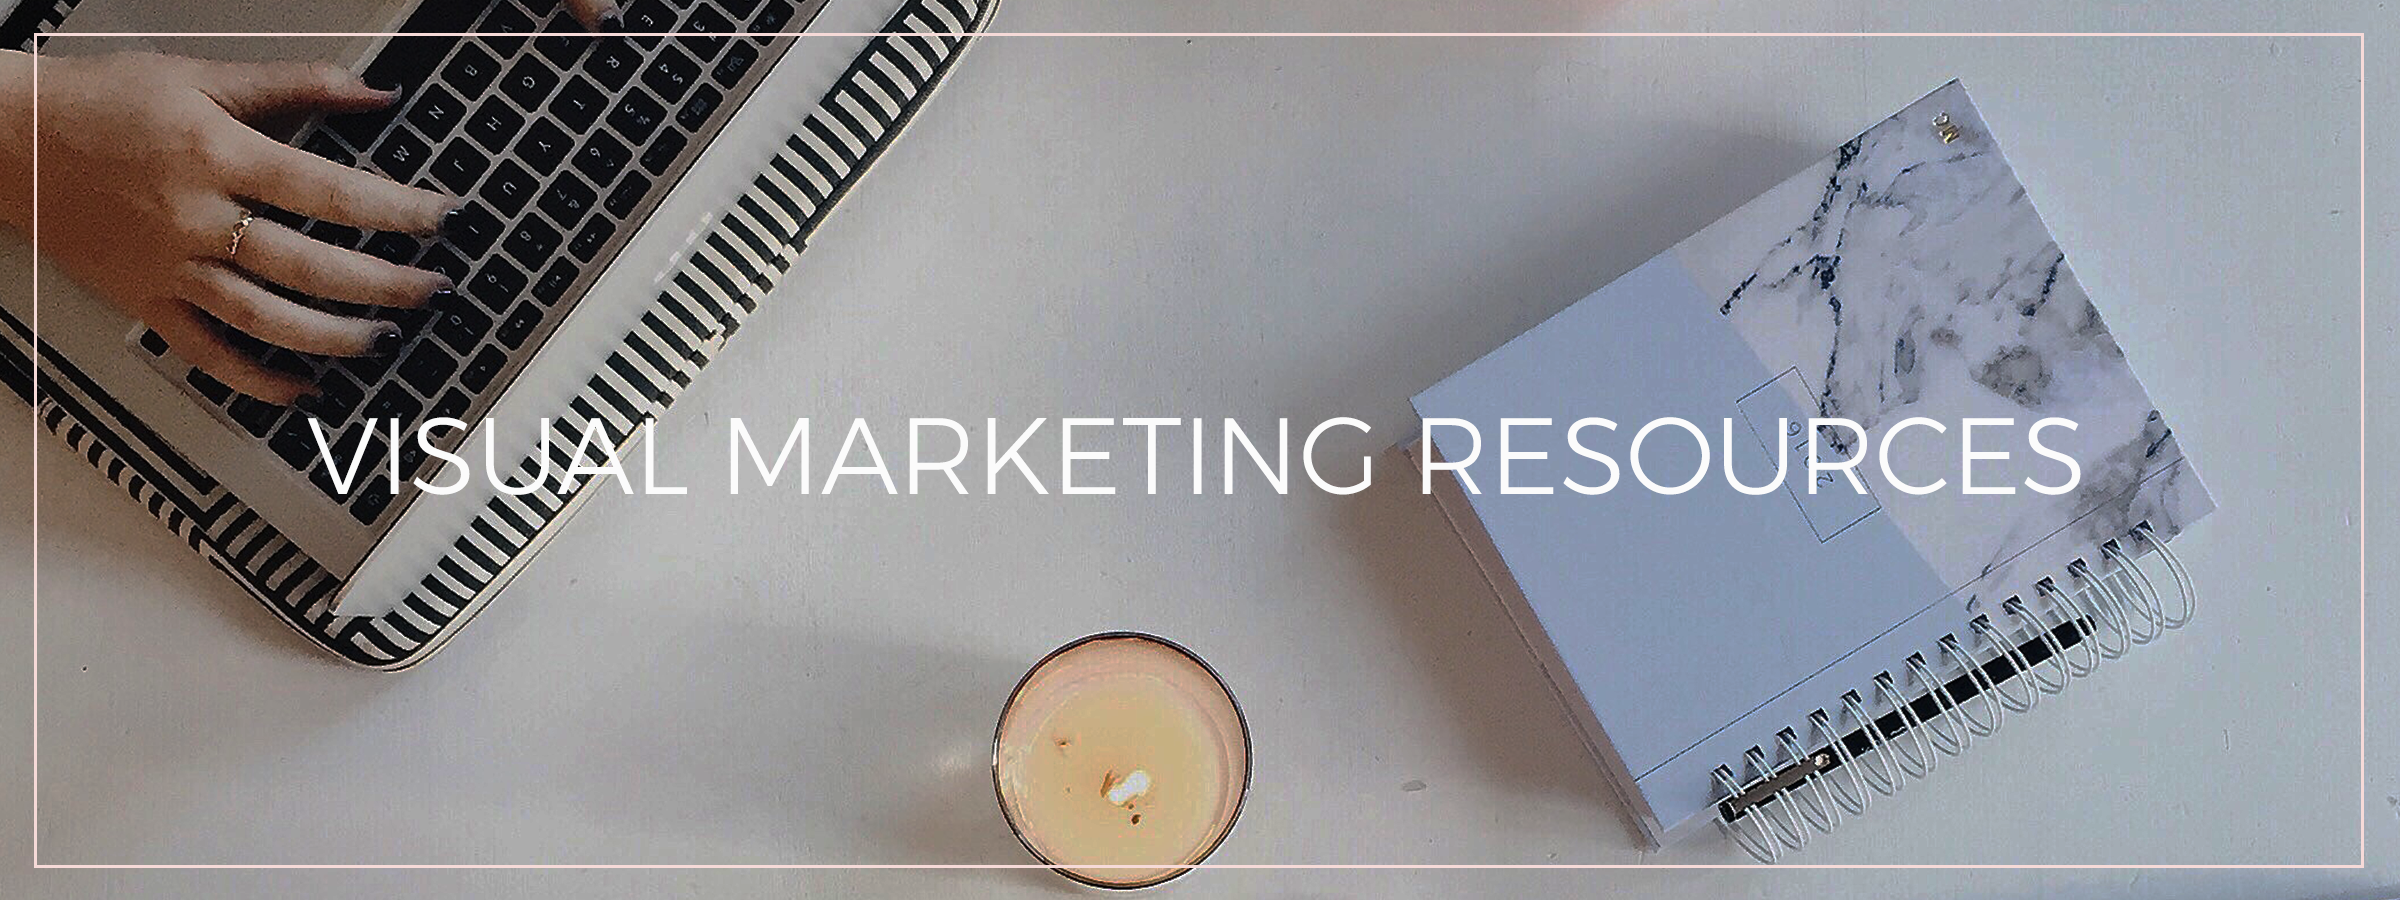 Visual marketing resources for entrepreneurs and small business owners.